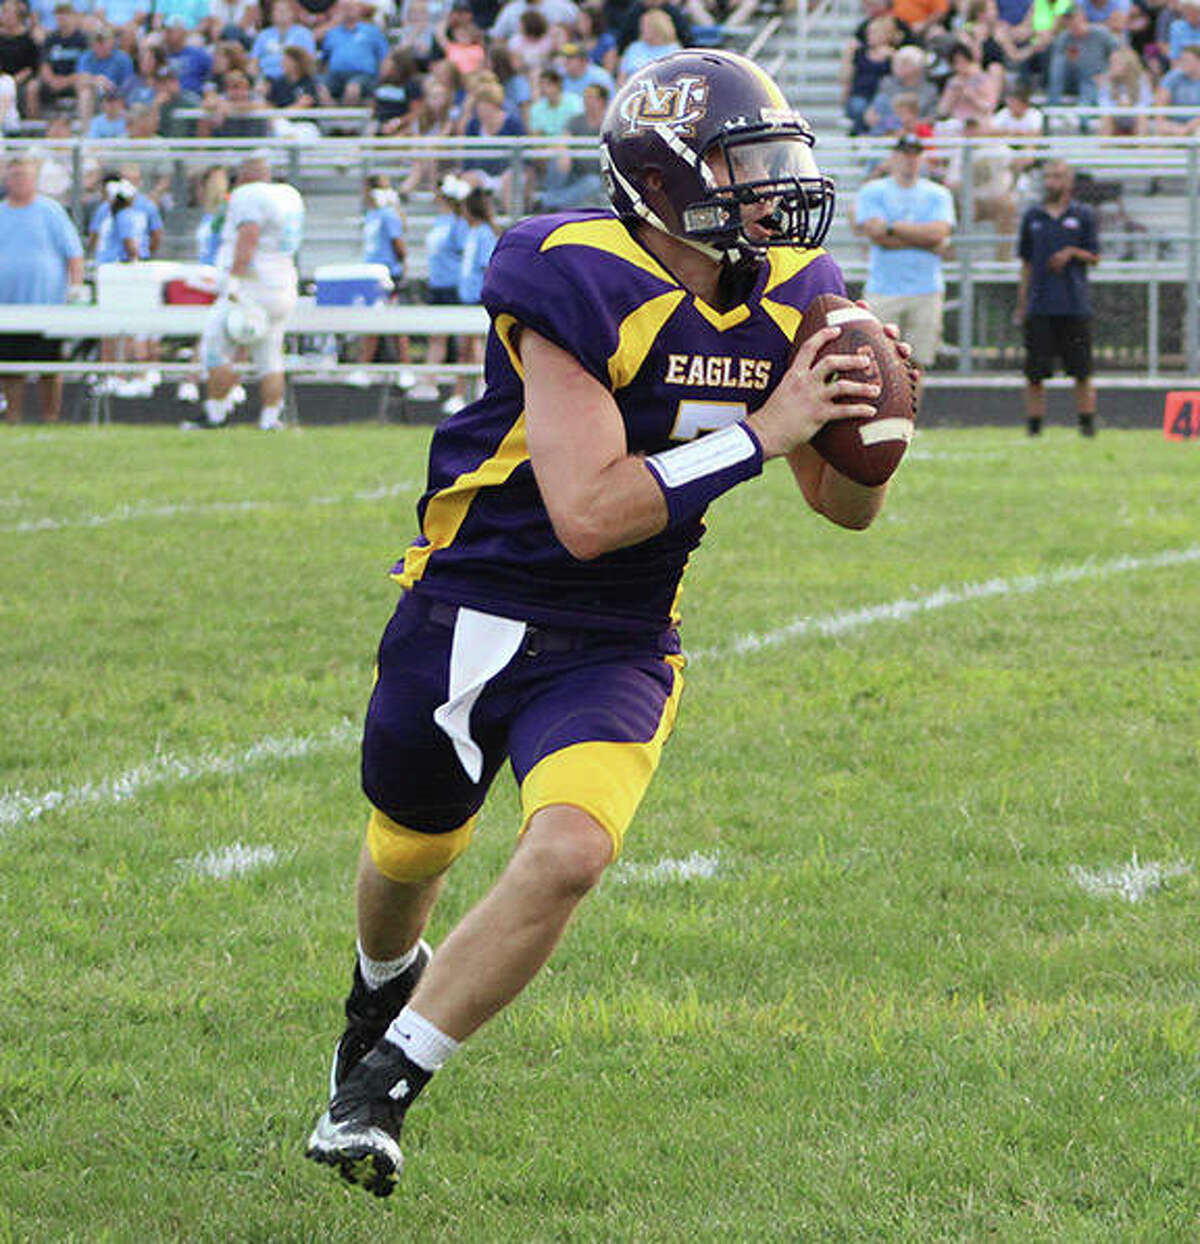 CM quarterback Tory Doerr (2008) rolls out looking for a receiver during the CM vs. Jersey alumni football game Saturday night in Bethalto.